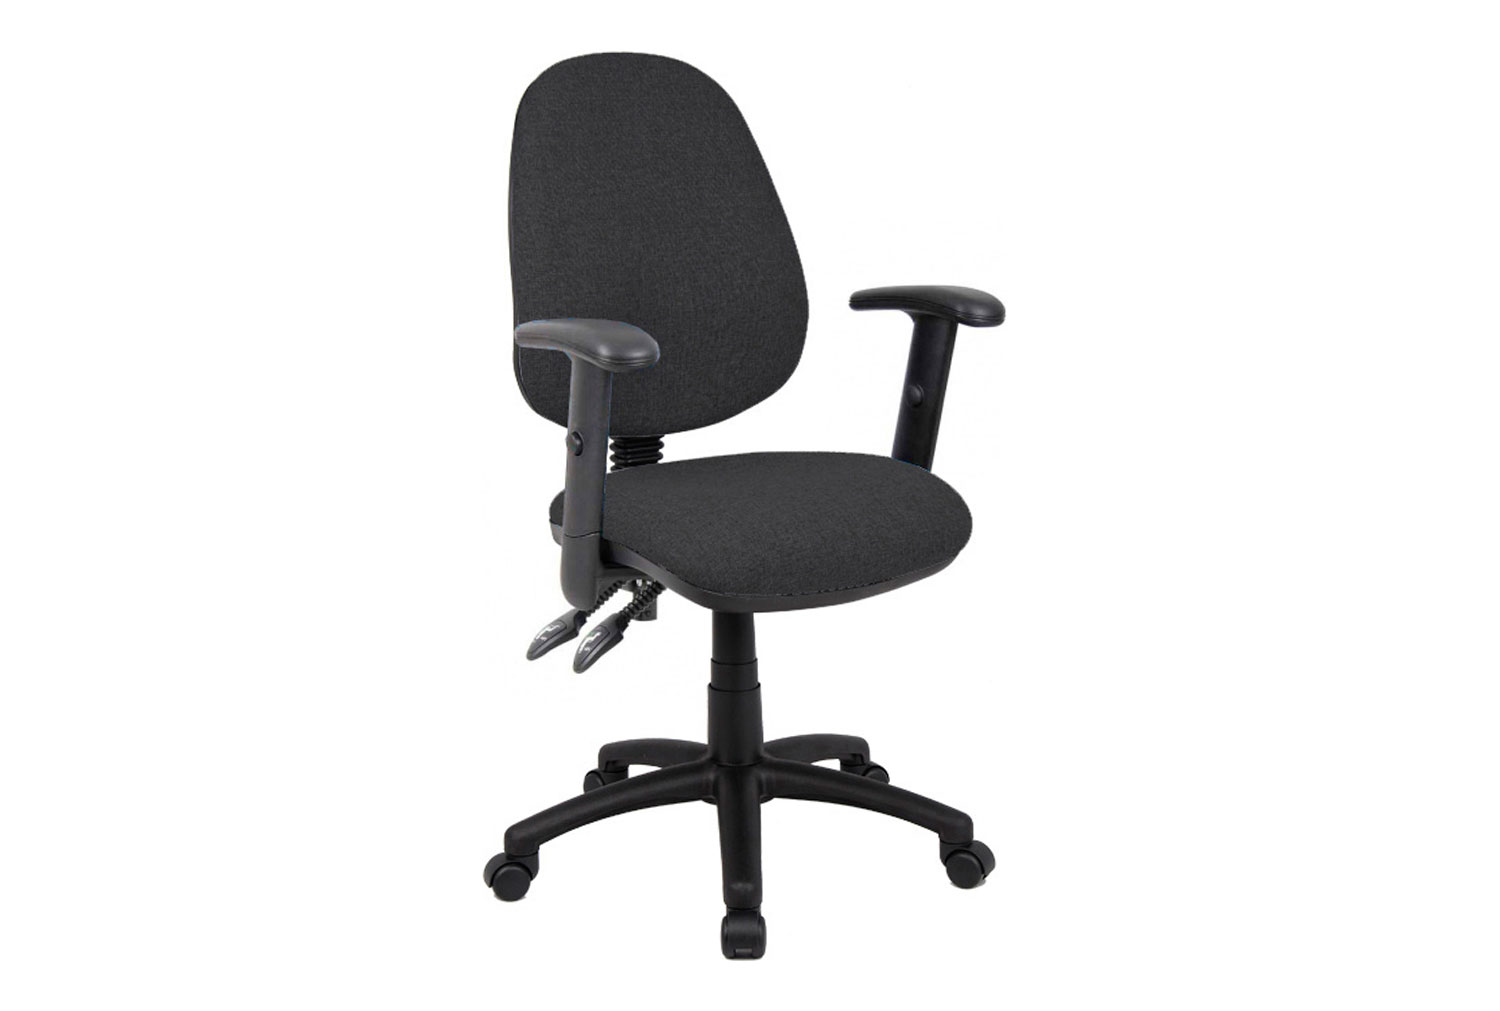 Full Lumbar 2 Lever Operator Office Chair With Adjustable Arms, Charcoal, Express Delivery